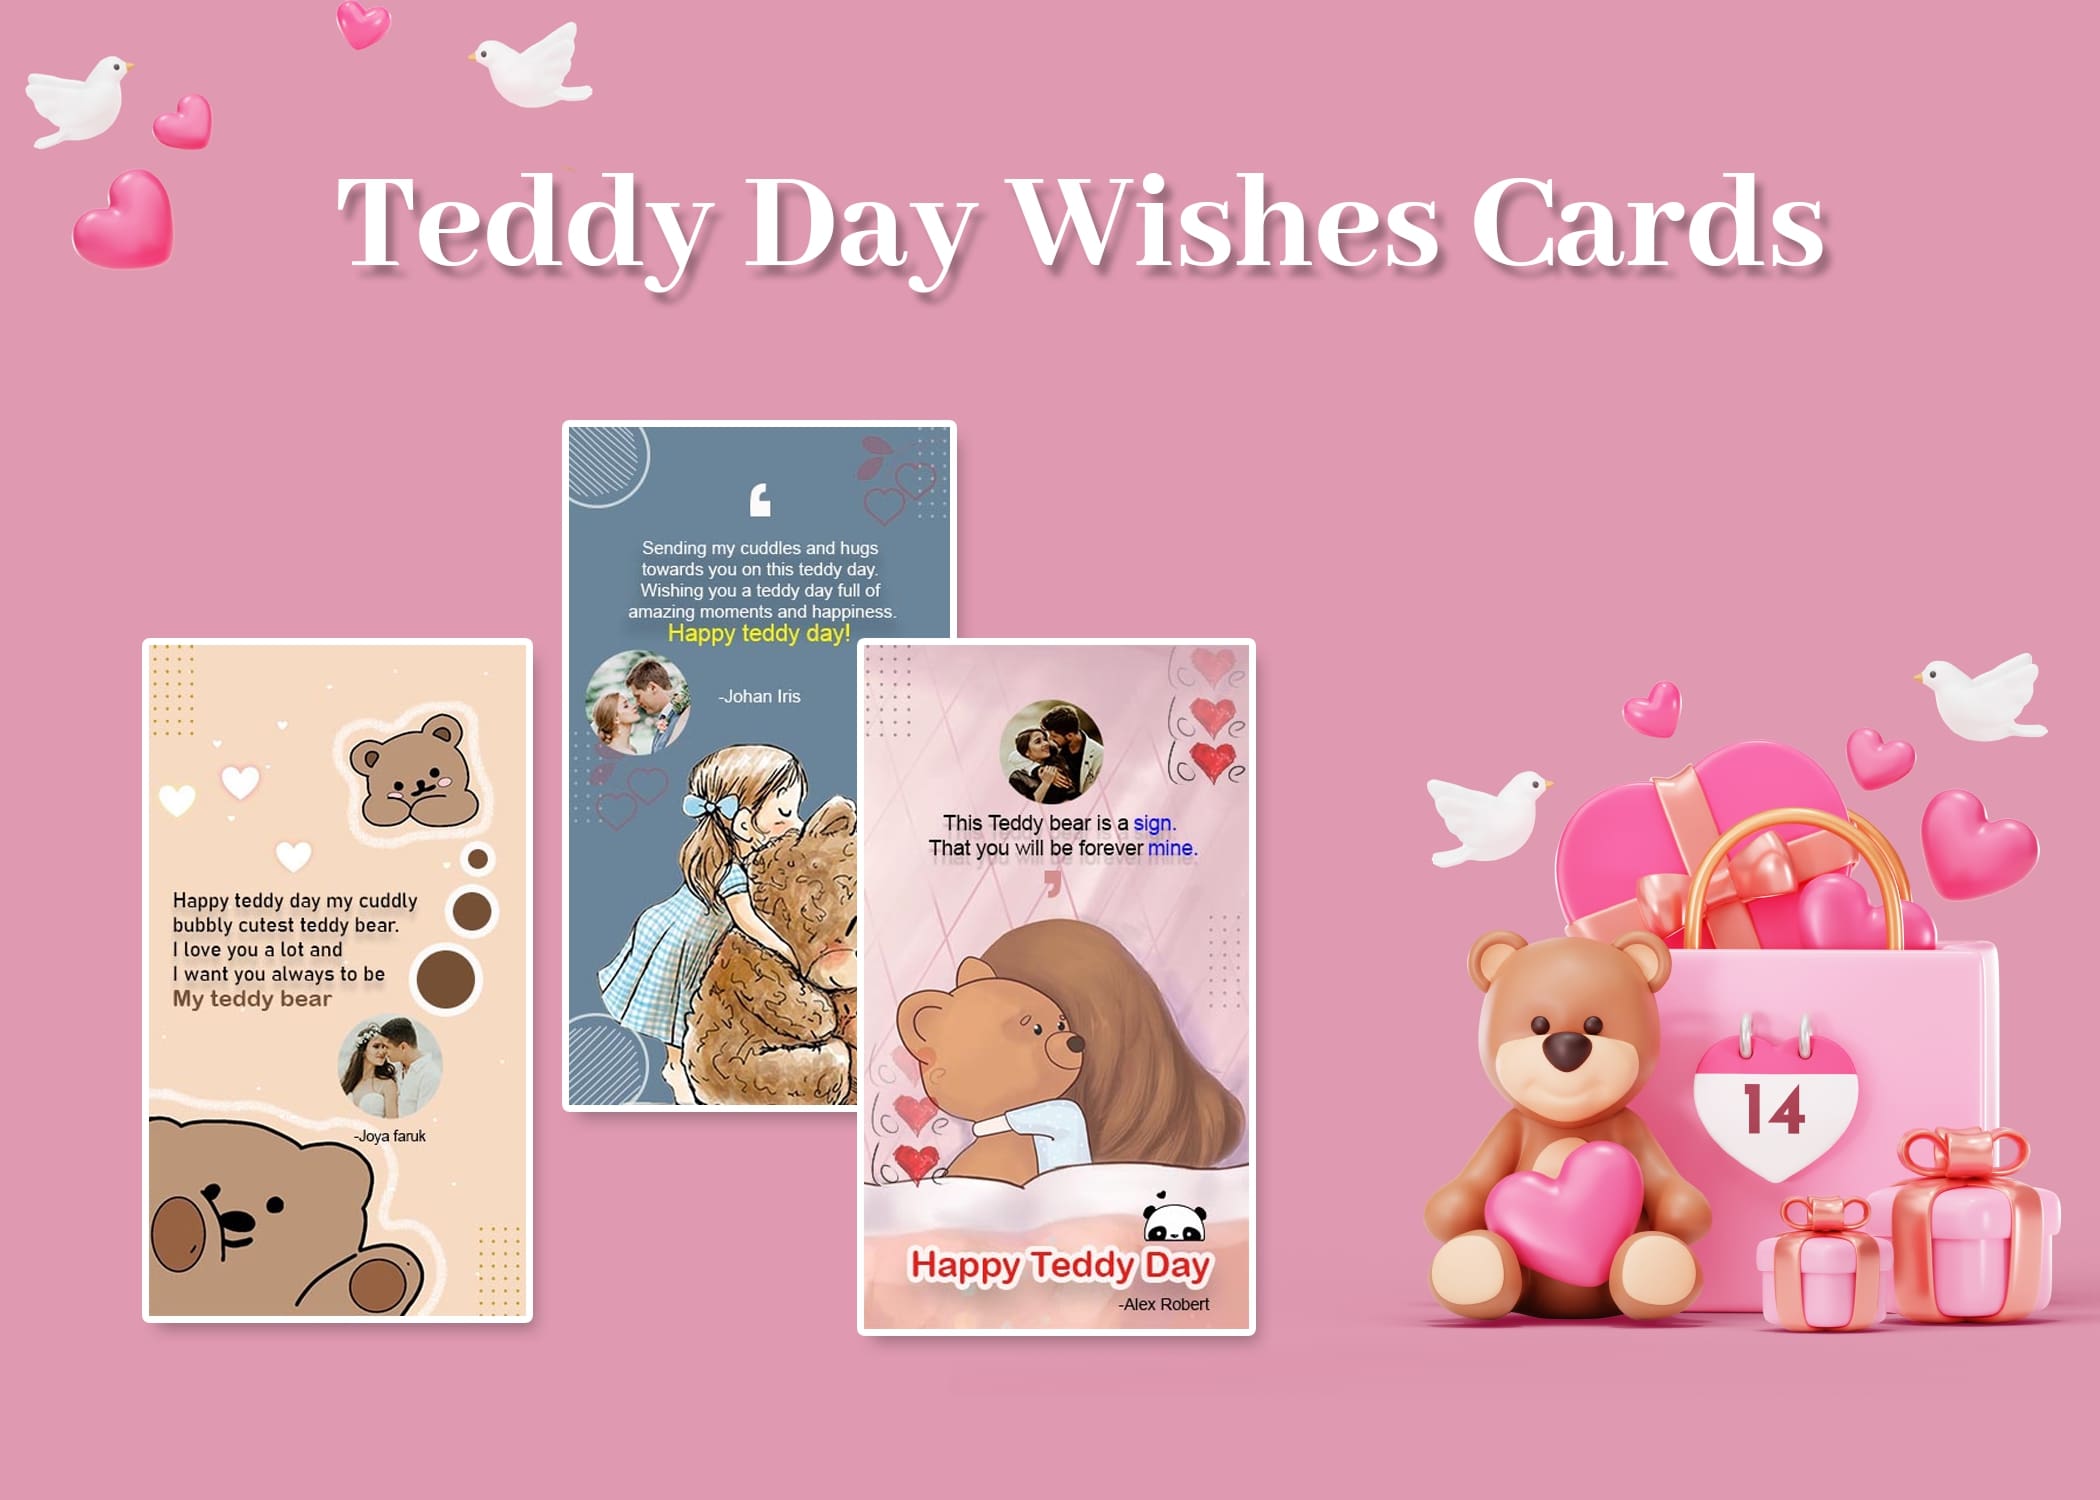 Express Your Love with Stunning Teddy Day Wishes Cards!